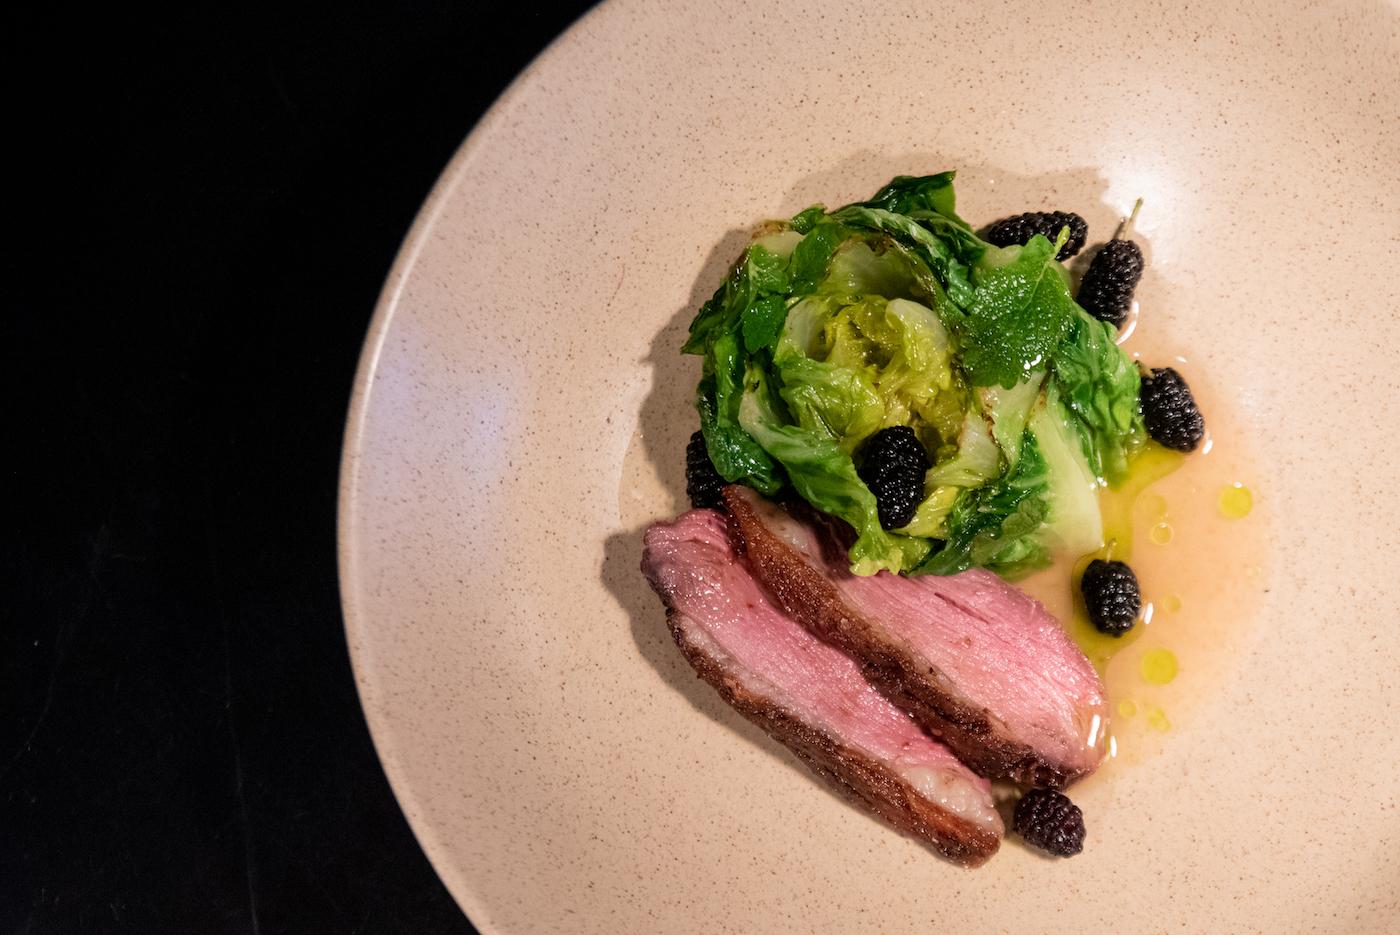 Magret duck with little gem lettuce and mulberries is served during the dinner service at Wherewithall at 3472 N. Elston Ave. in Chicago, Illinois. Photo: WTTW/Kathleen Hinkel